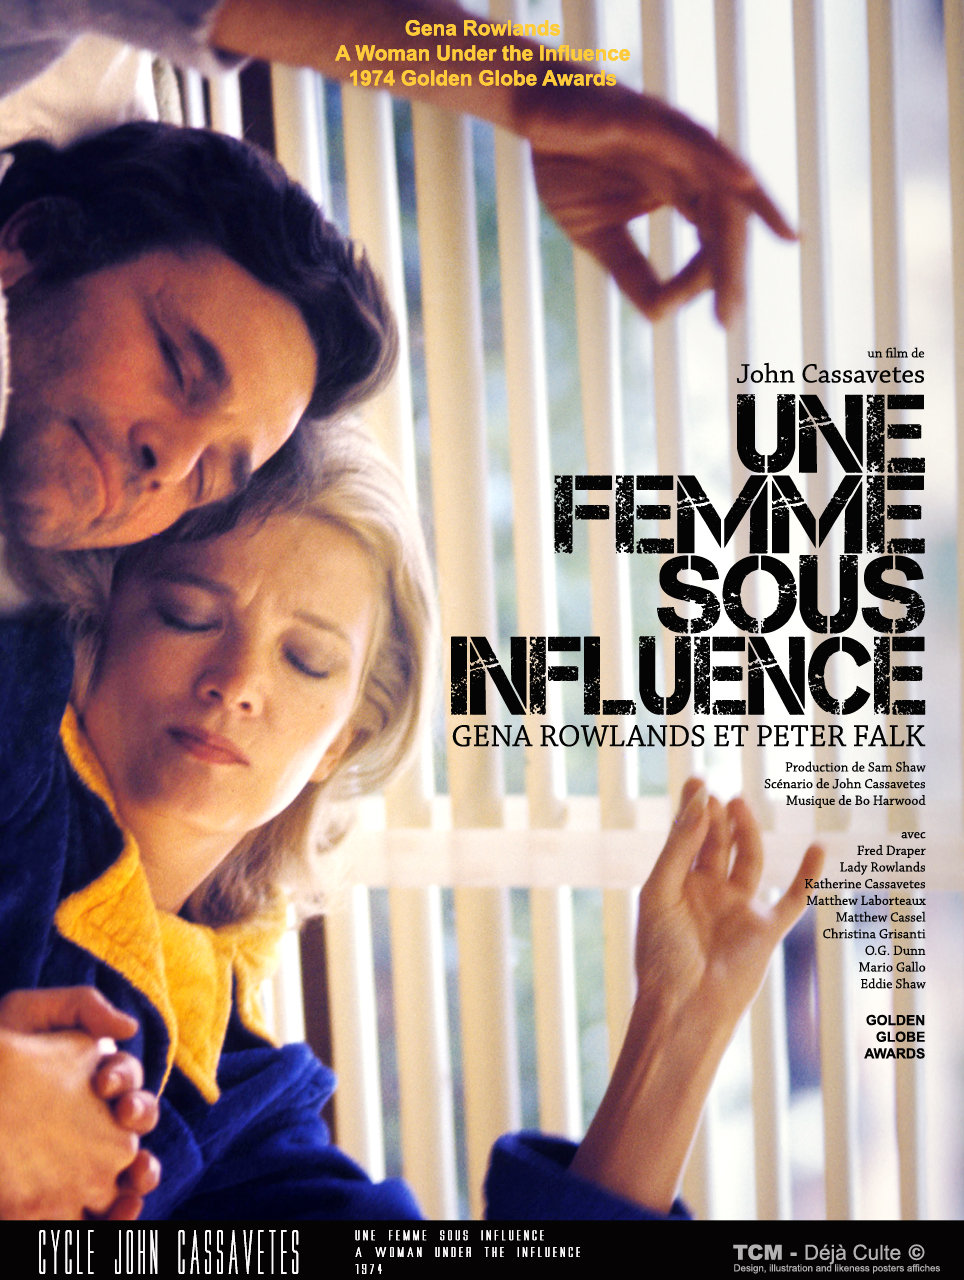 Woman Under the Influence (1974) by John Cassavetes, with Gena